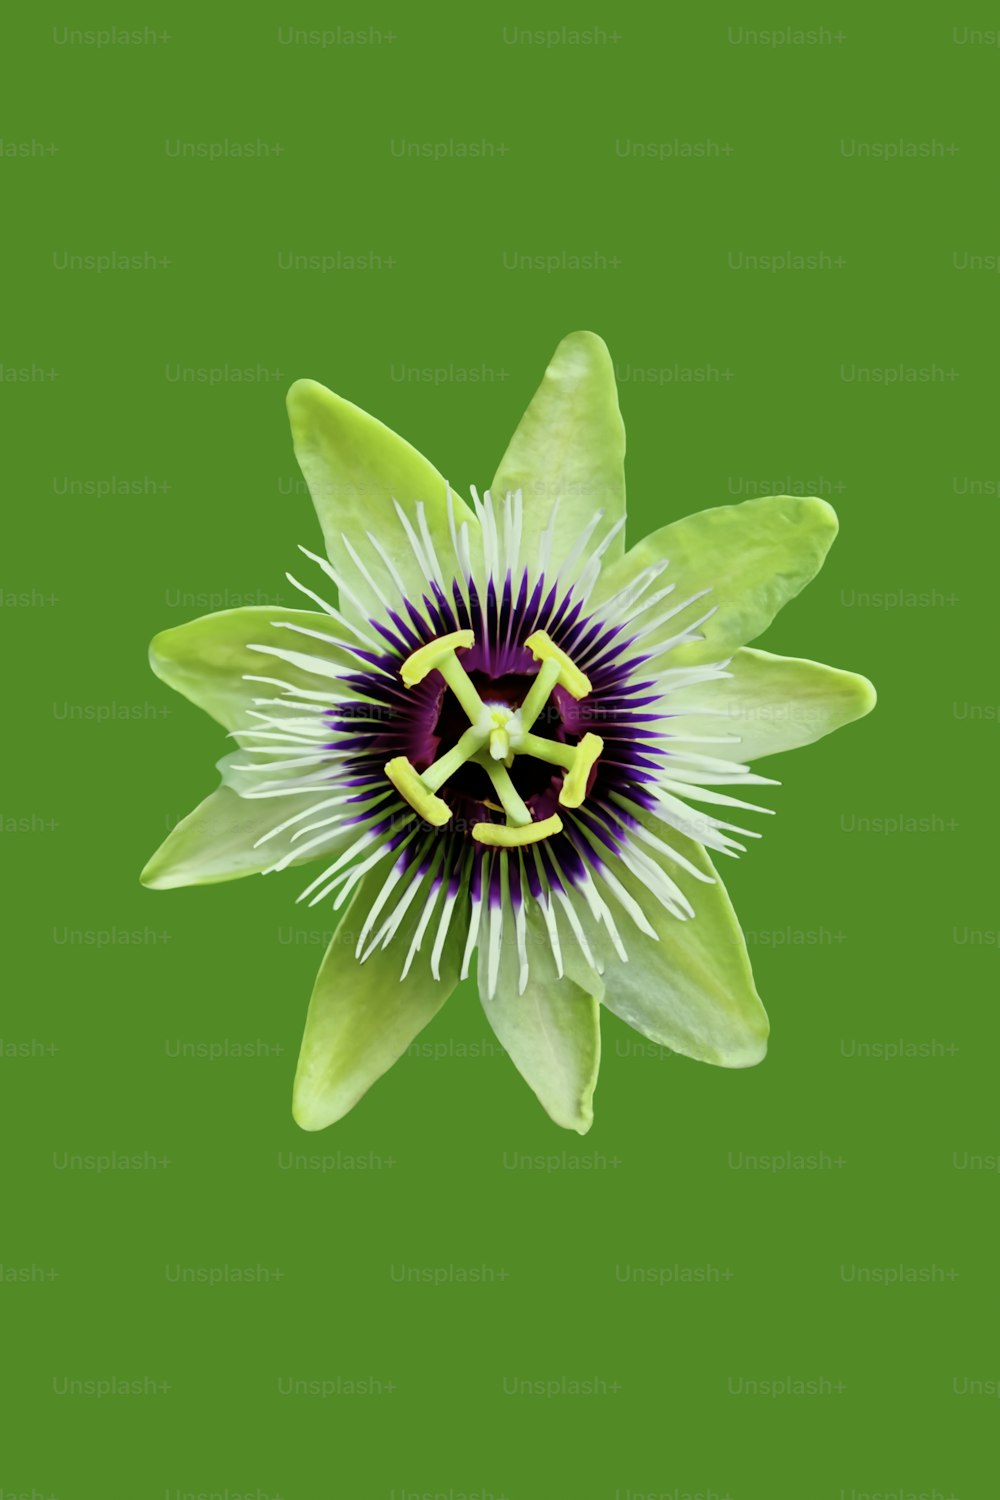 a white flower with a purple center on a green background